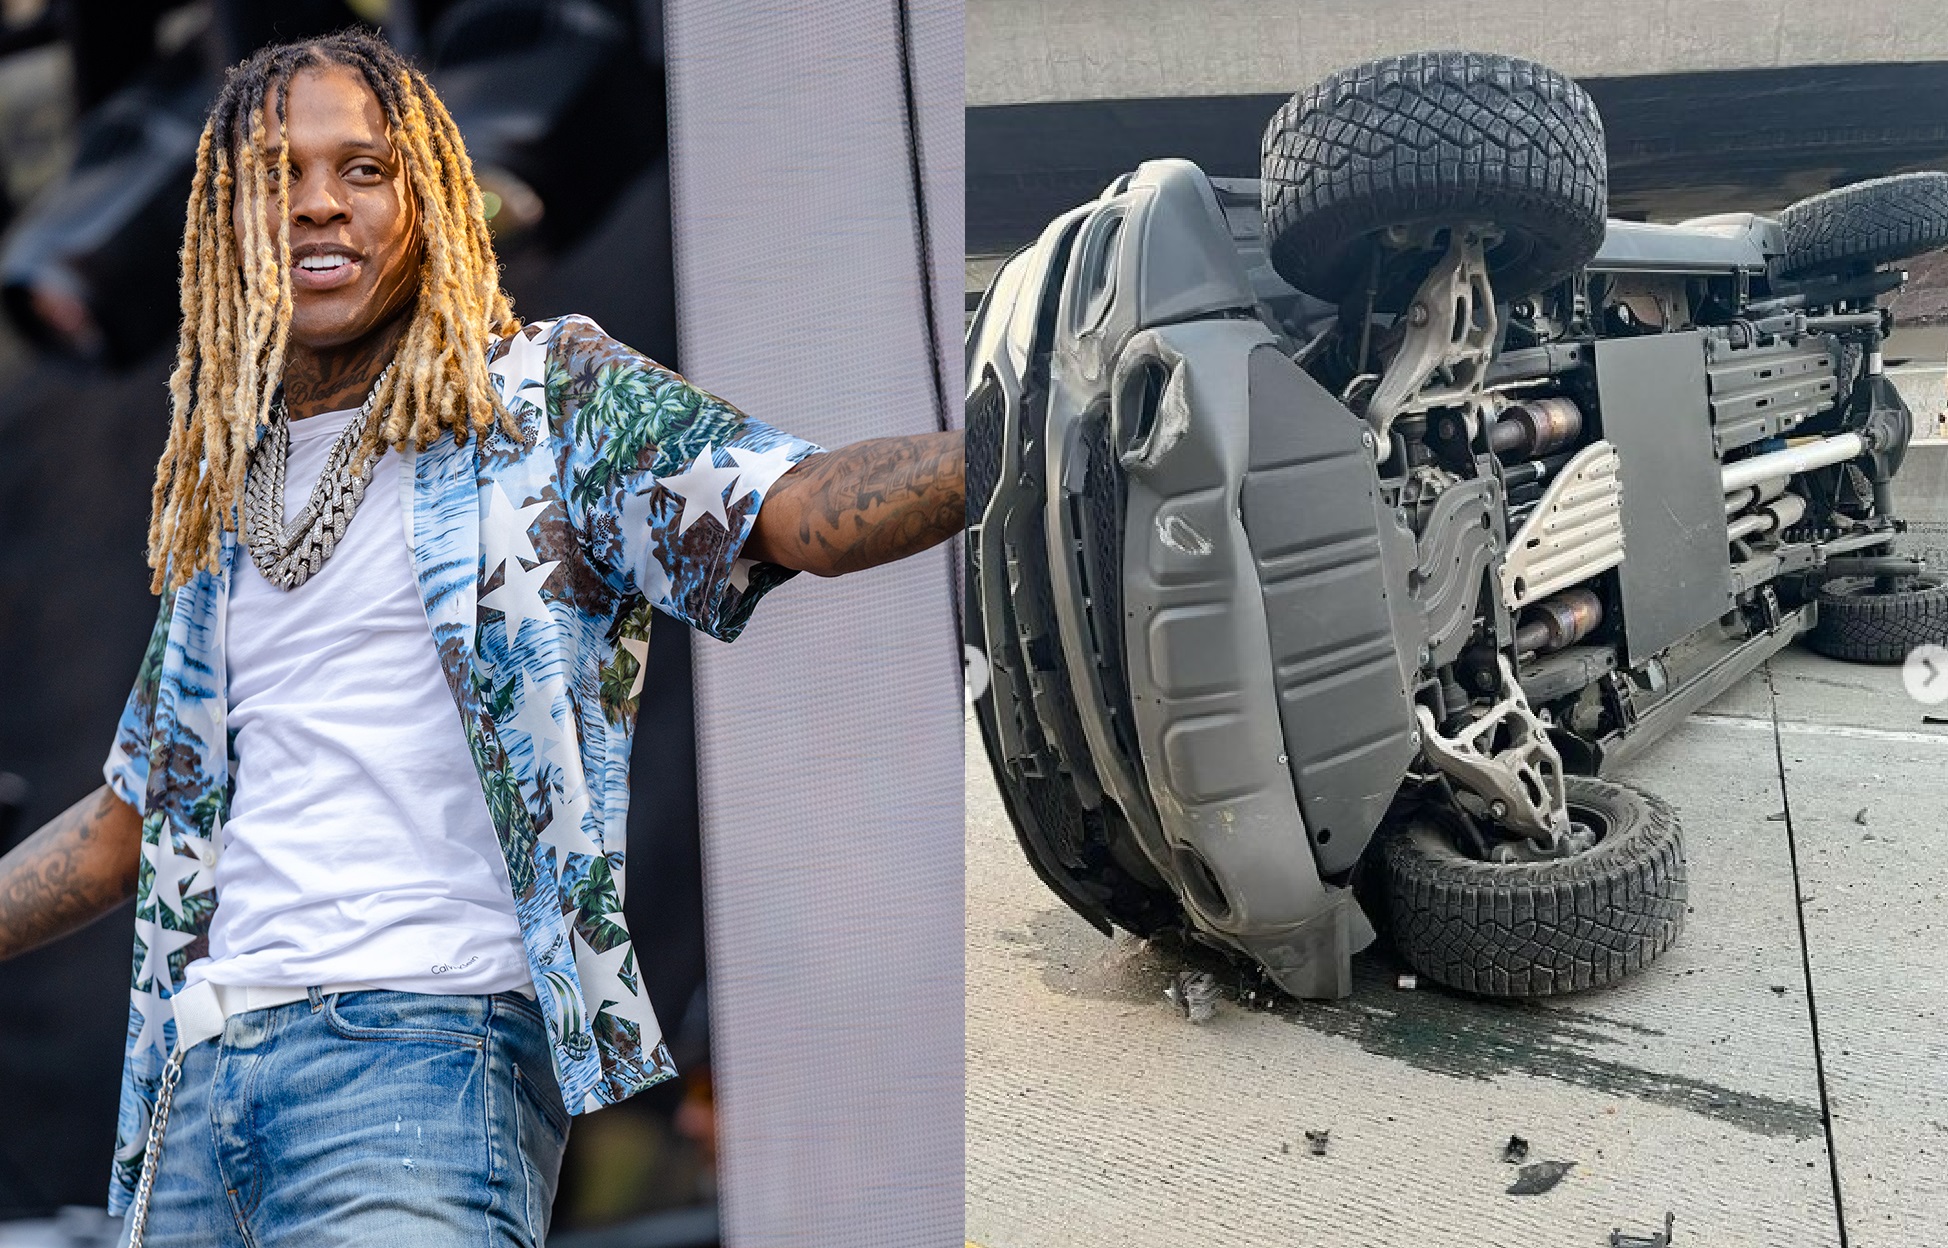 In 2018, Lil Durk was involved in a hit-and-run accident